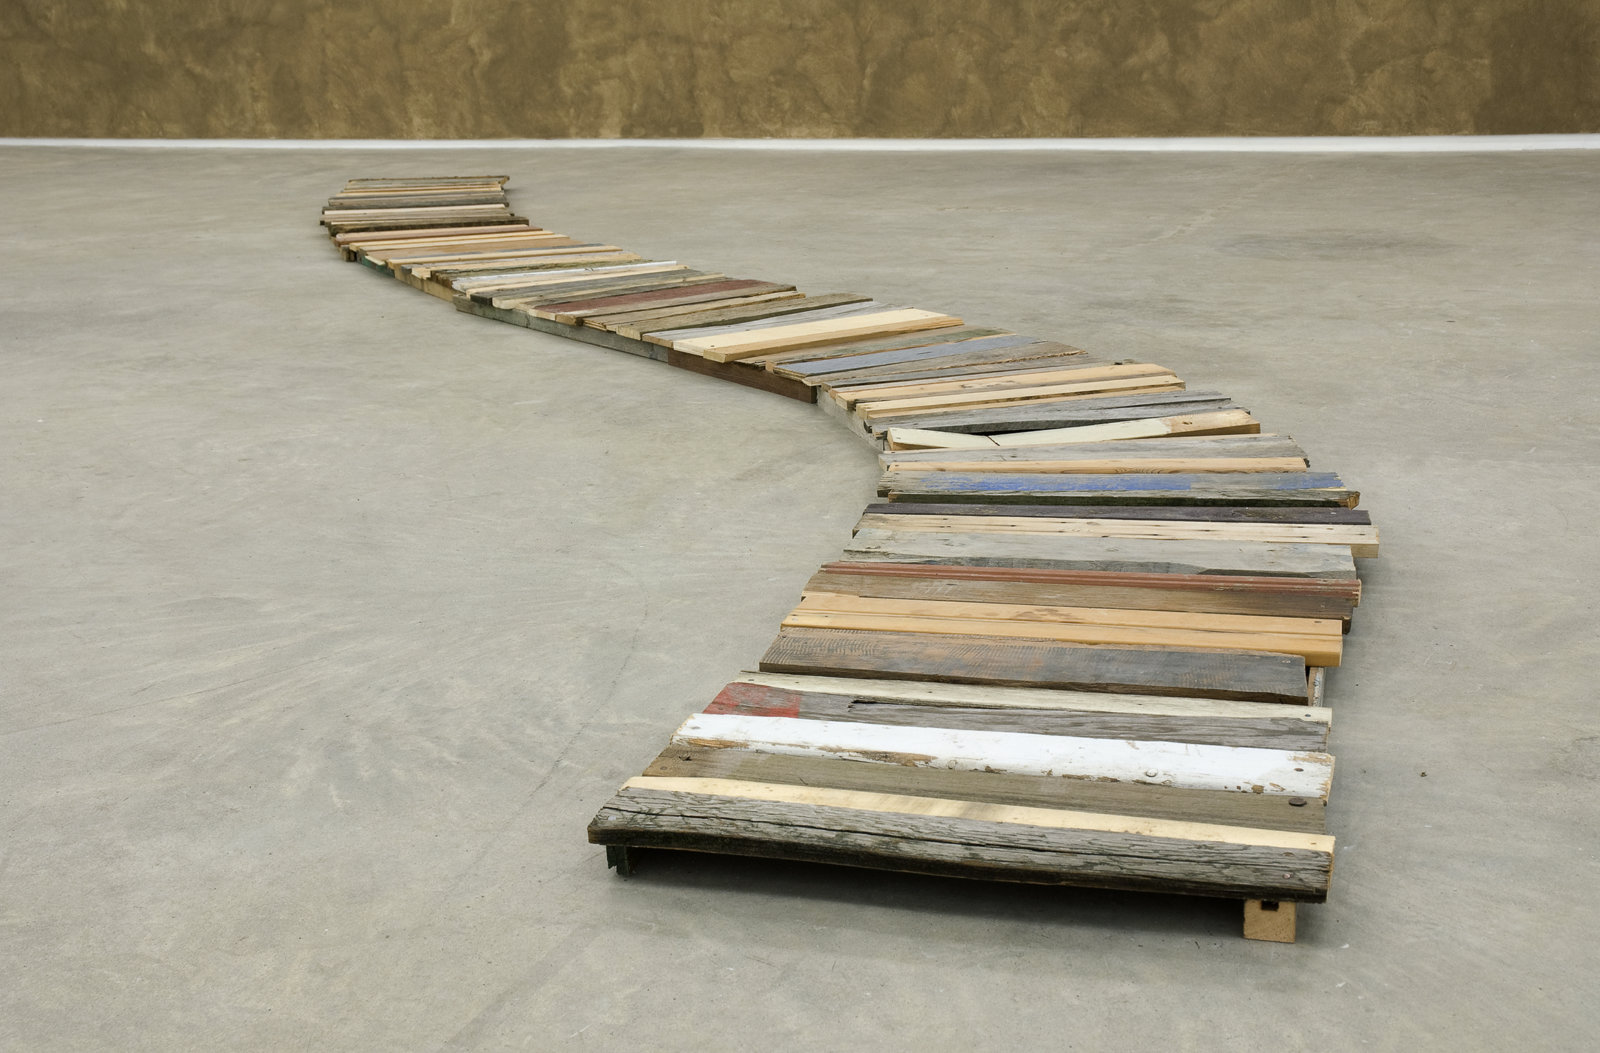 Ashes Withyman, A Most Elastic Road from Uncertain Pilgrimage, 2009, found wood, found nails, 276 x 44 x 3 in. (701 x 112 x 6 cm)